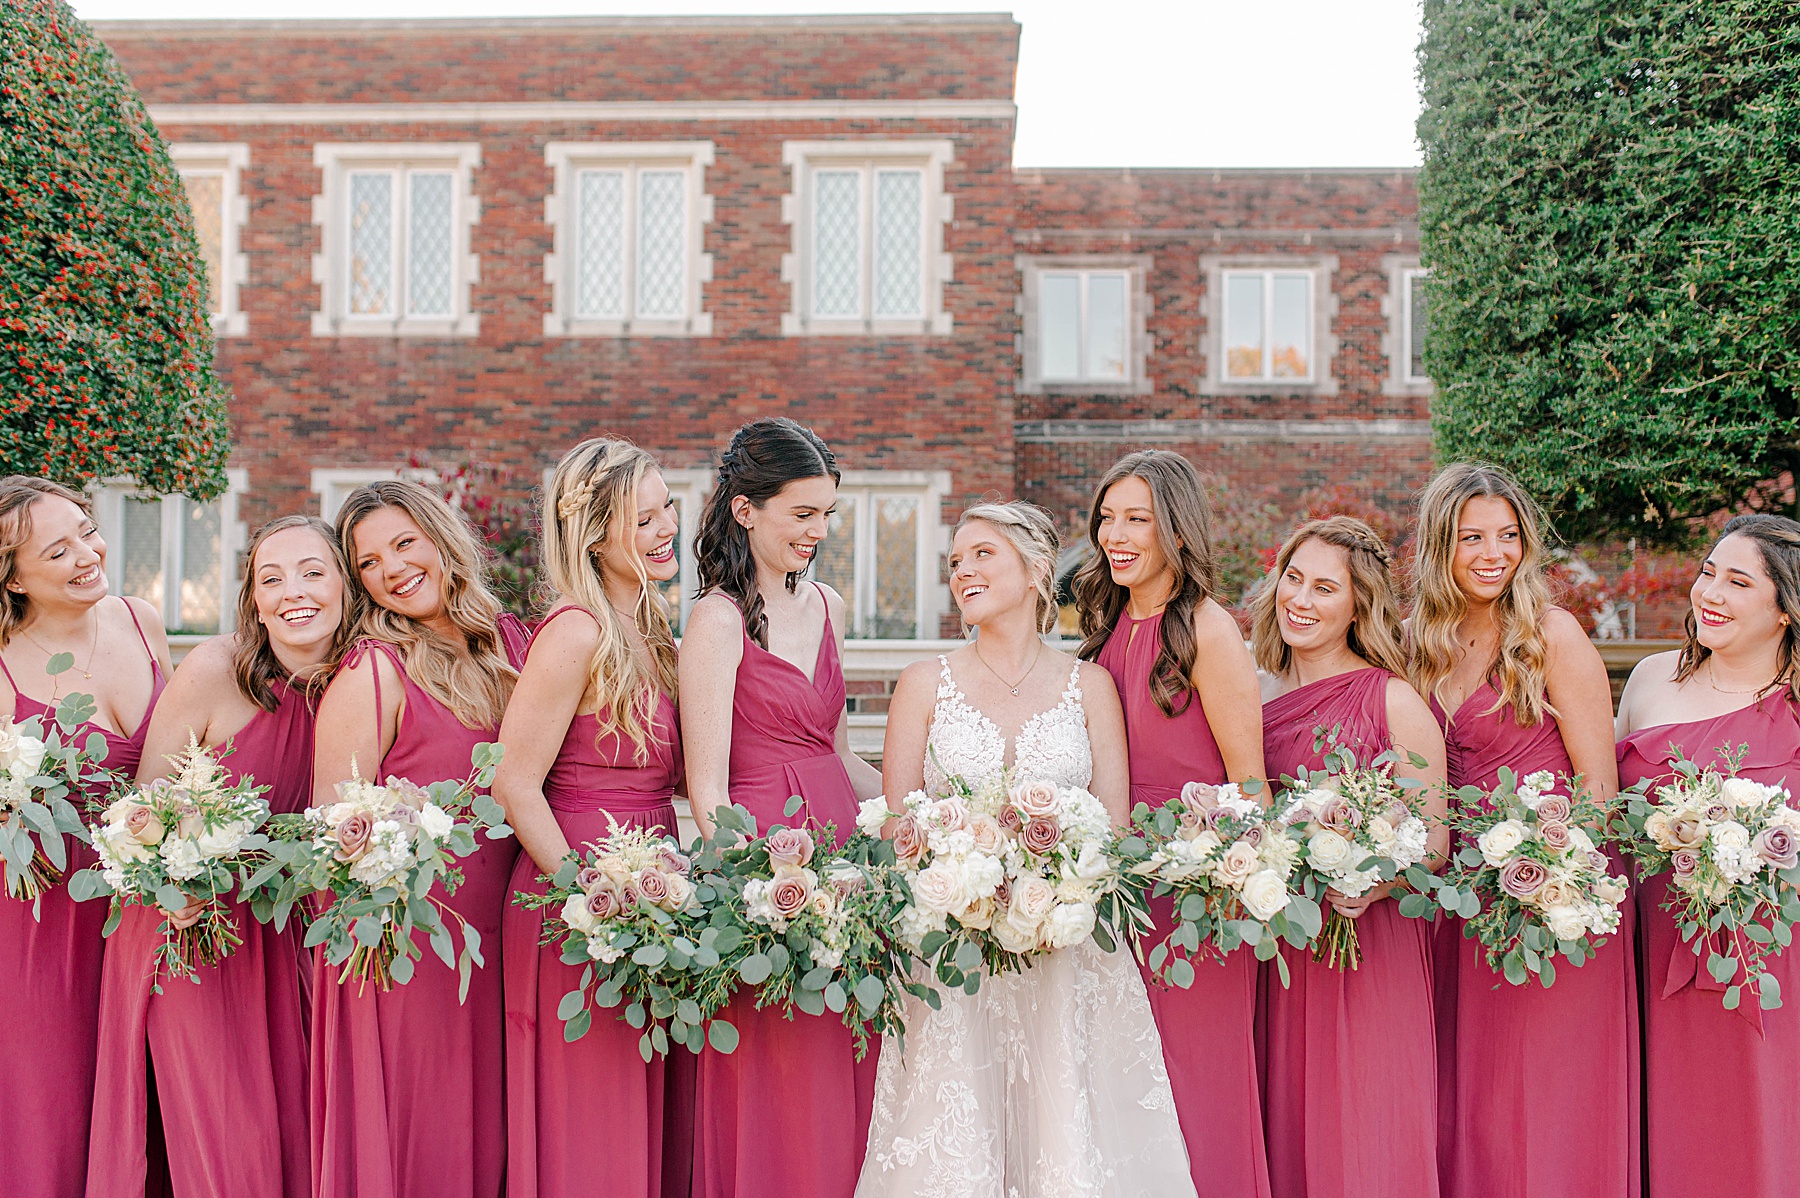 Bridal party in front of church